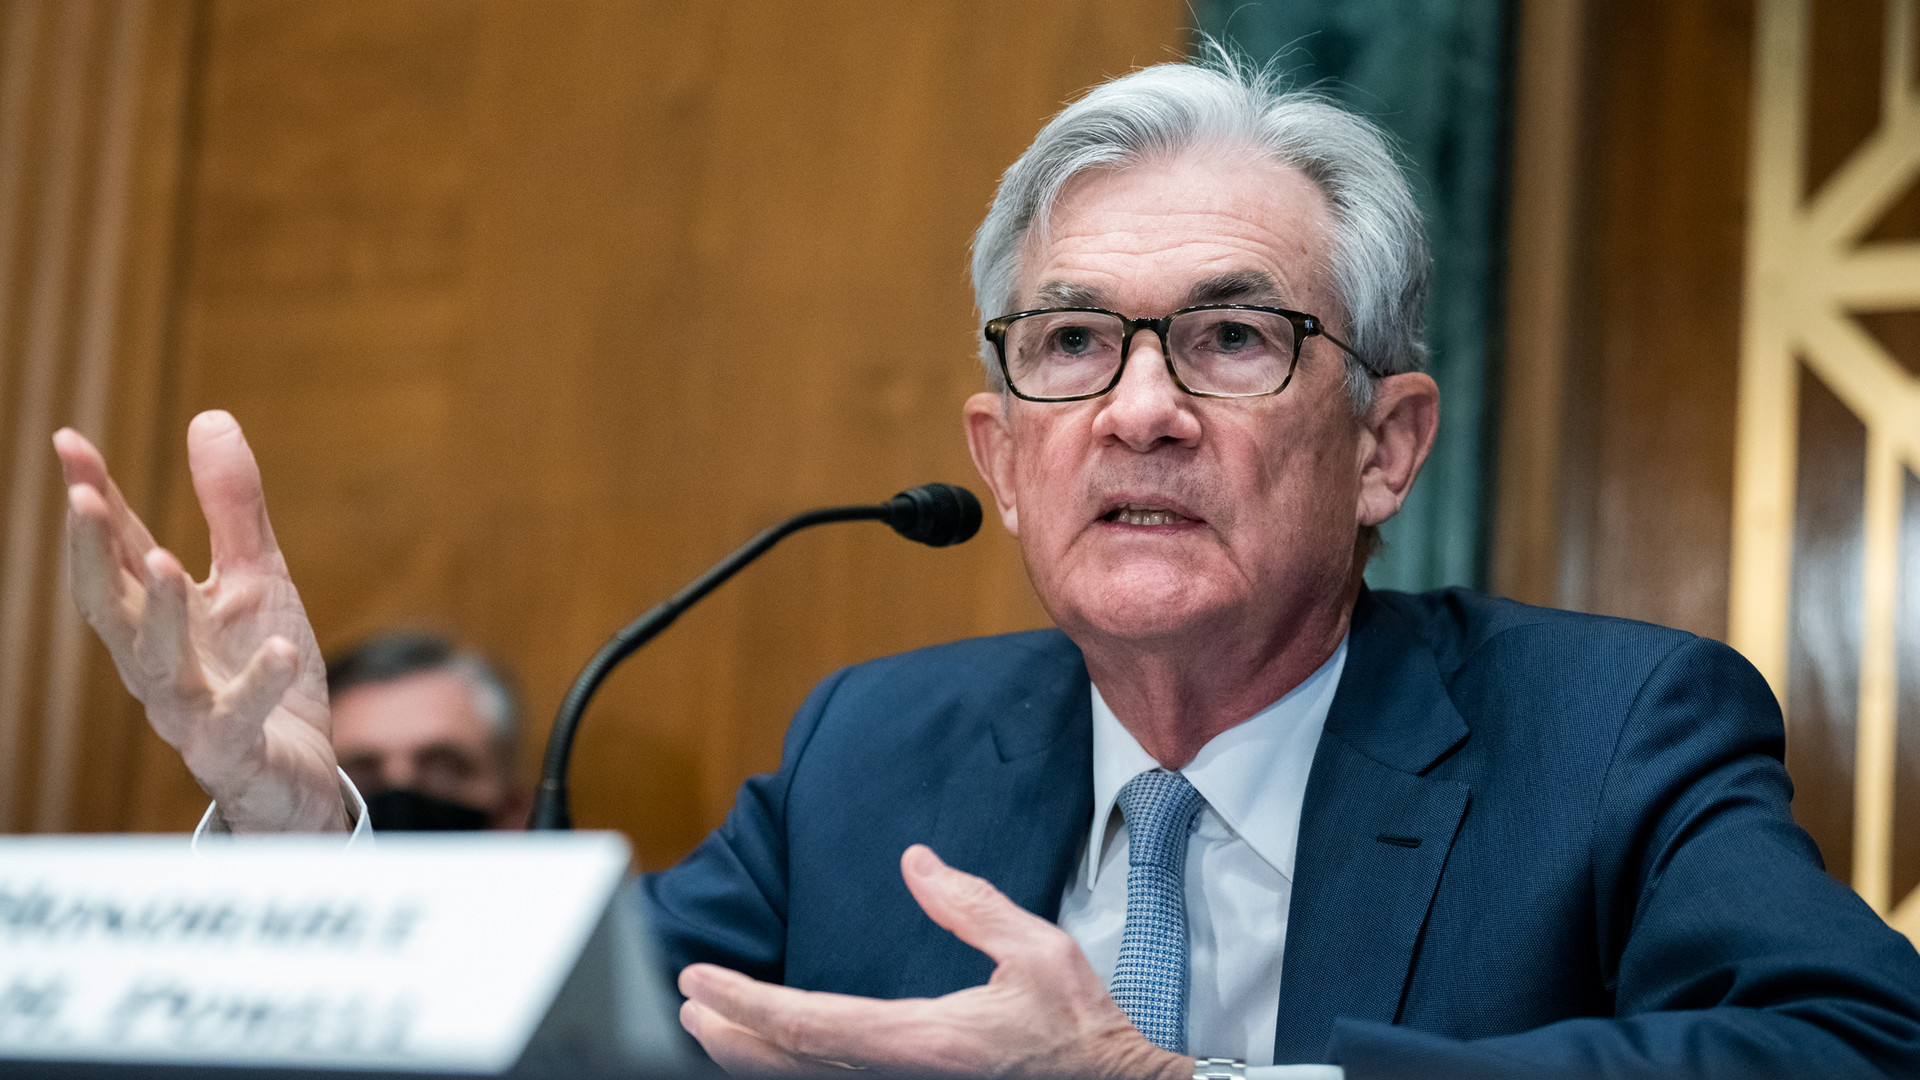 The Fed Is Hiking Interest Rates. Should That Change Your Investment Strategy?